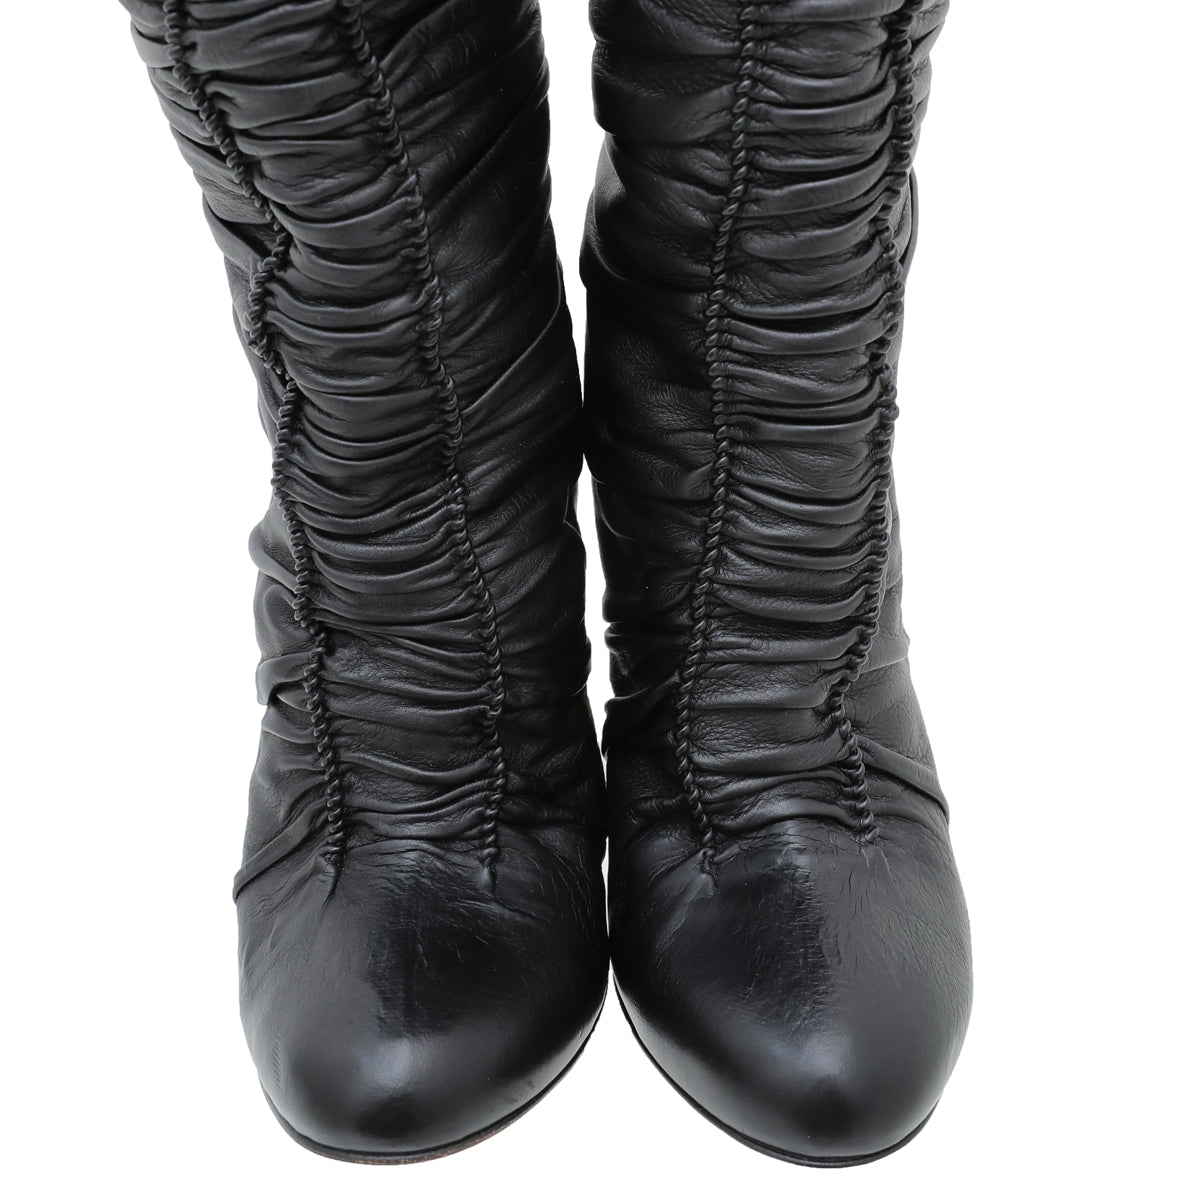 Christian Louboutin Black Pleated Knee High Boots 37